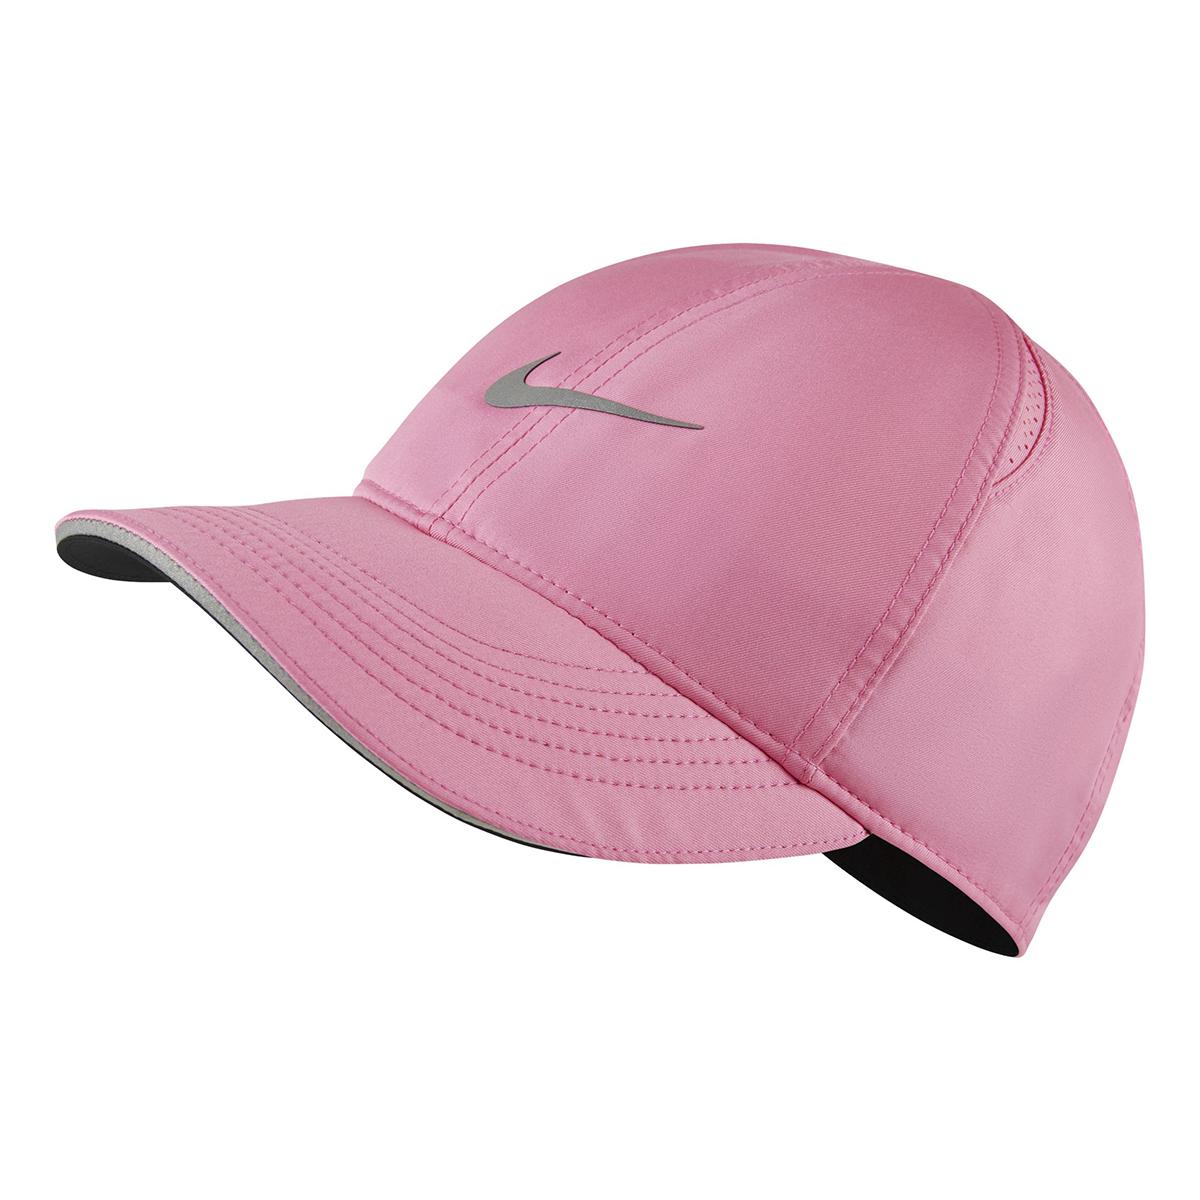 Nike Synthetic Featherlight Running Cap in Pink - Lyst